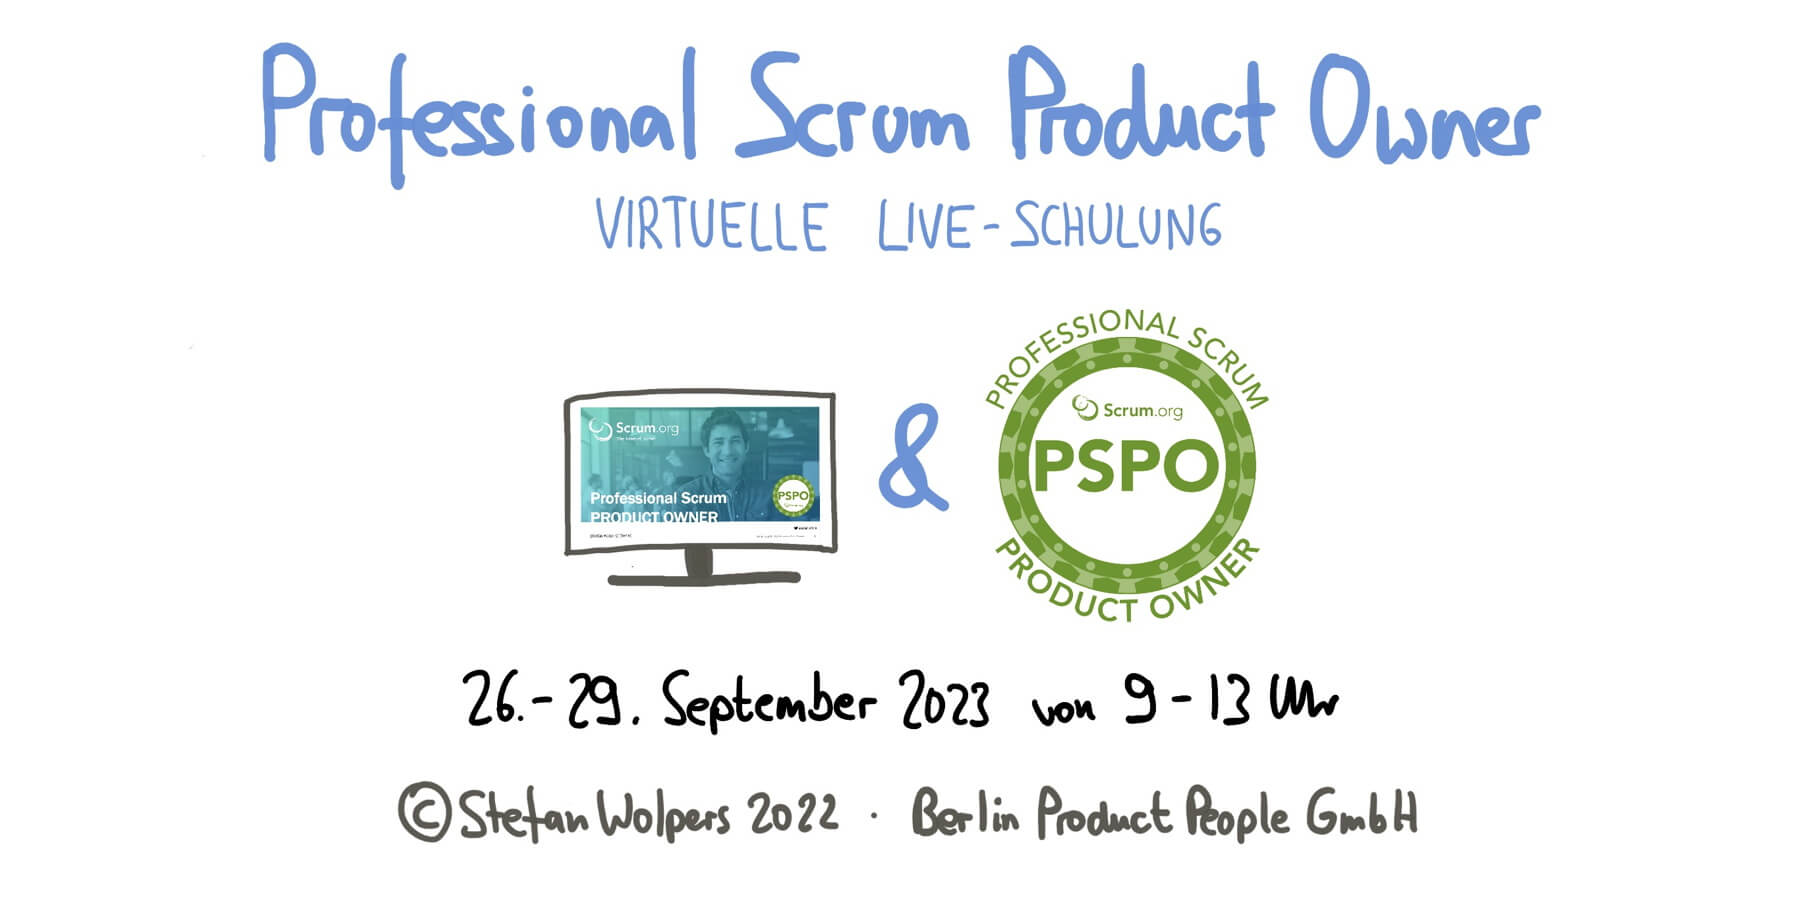 Professional Scrum Product Owner Training mit PSPO I Zertifikat — 26-29. September 2023 — Berlin-Product-People.com